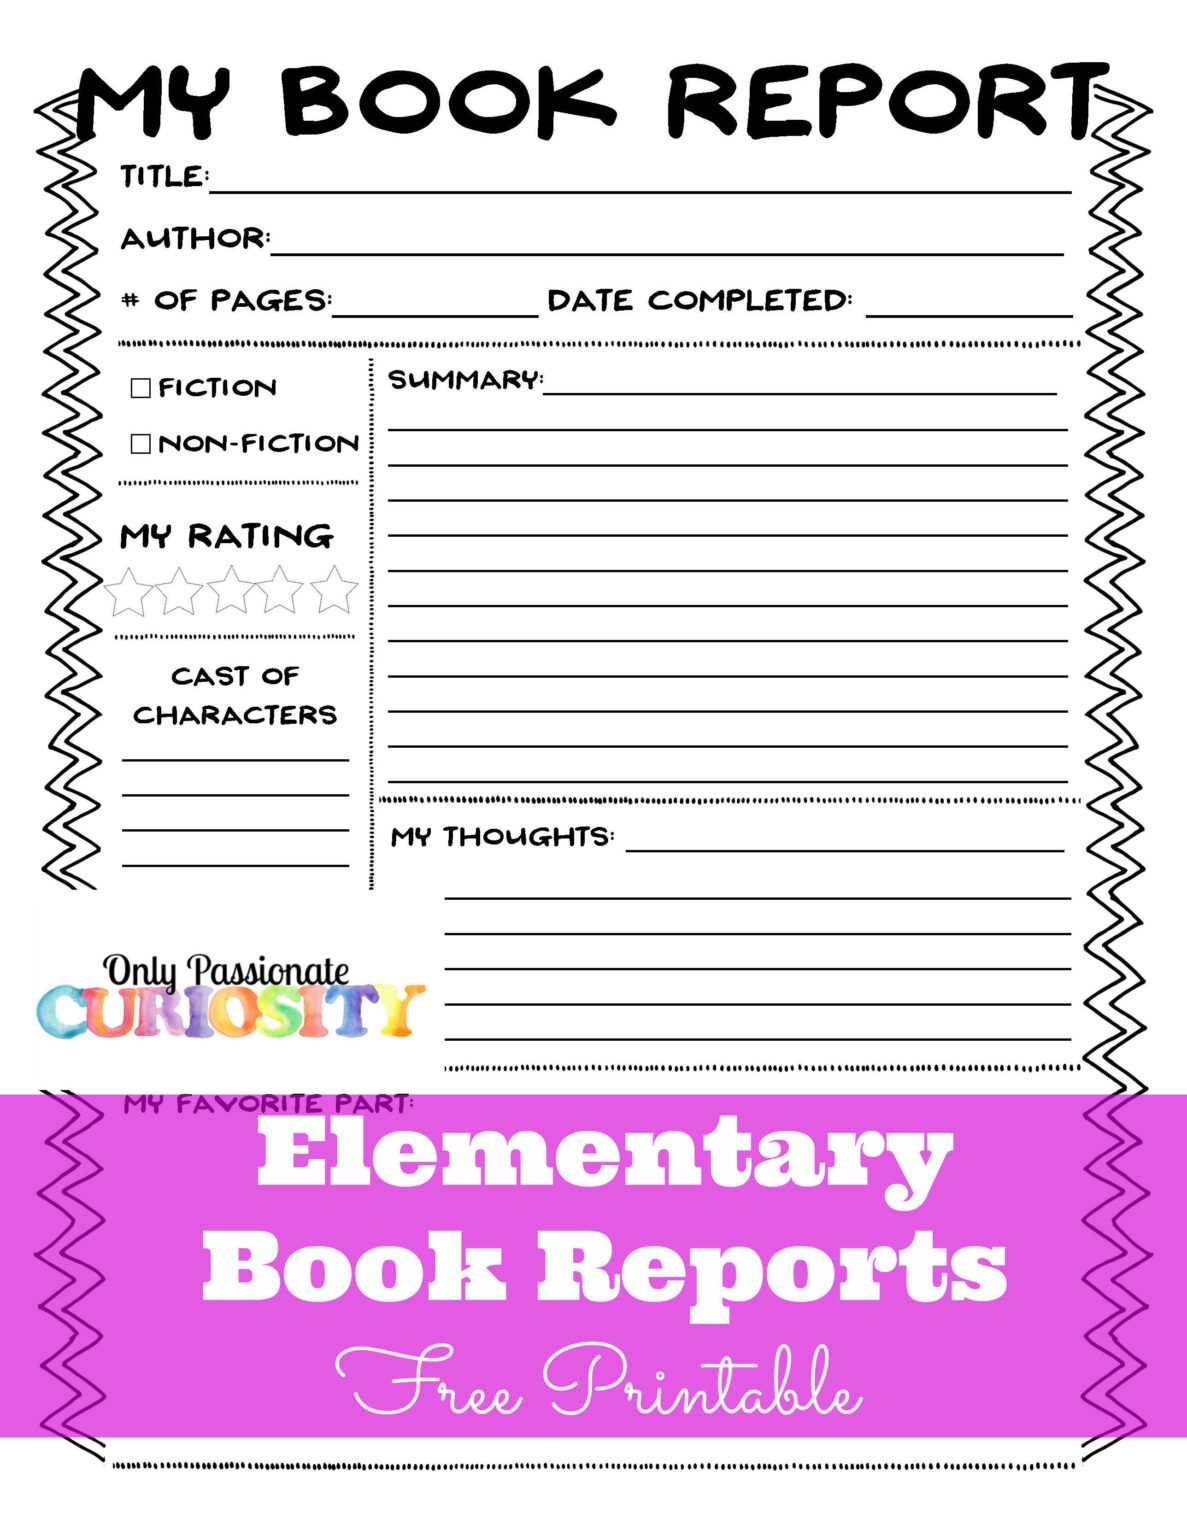 book reports examples